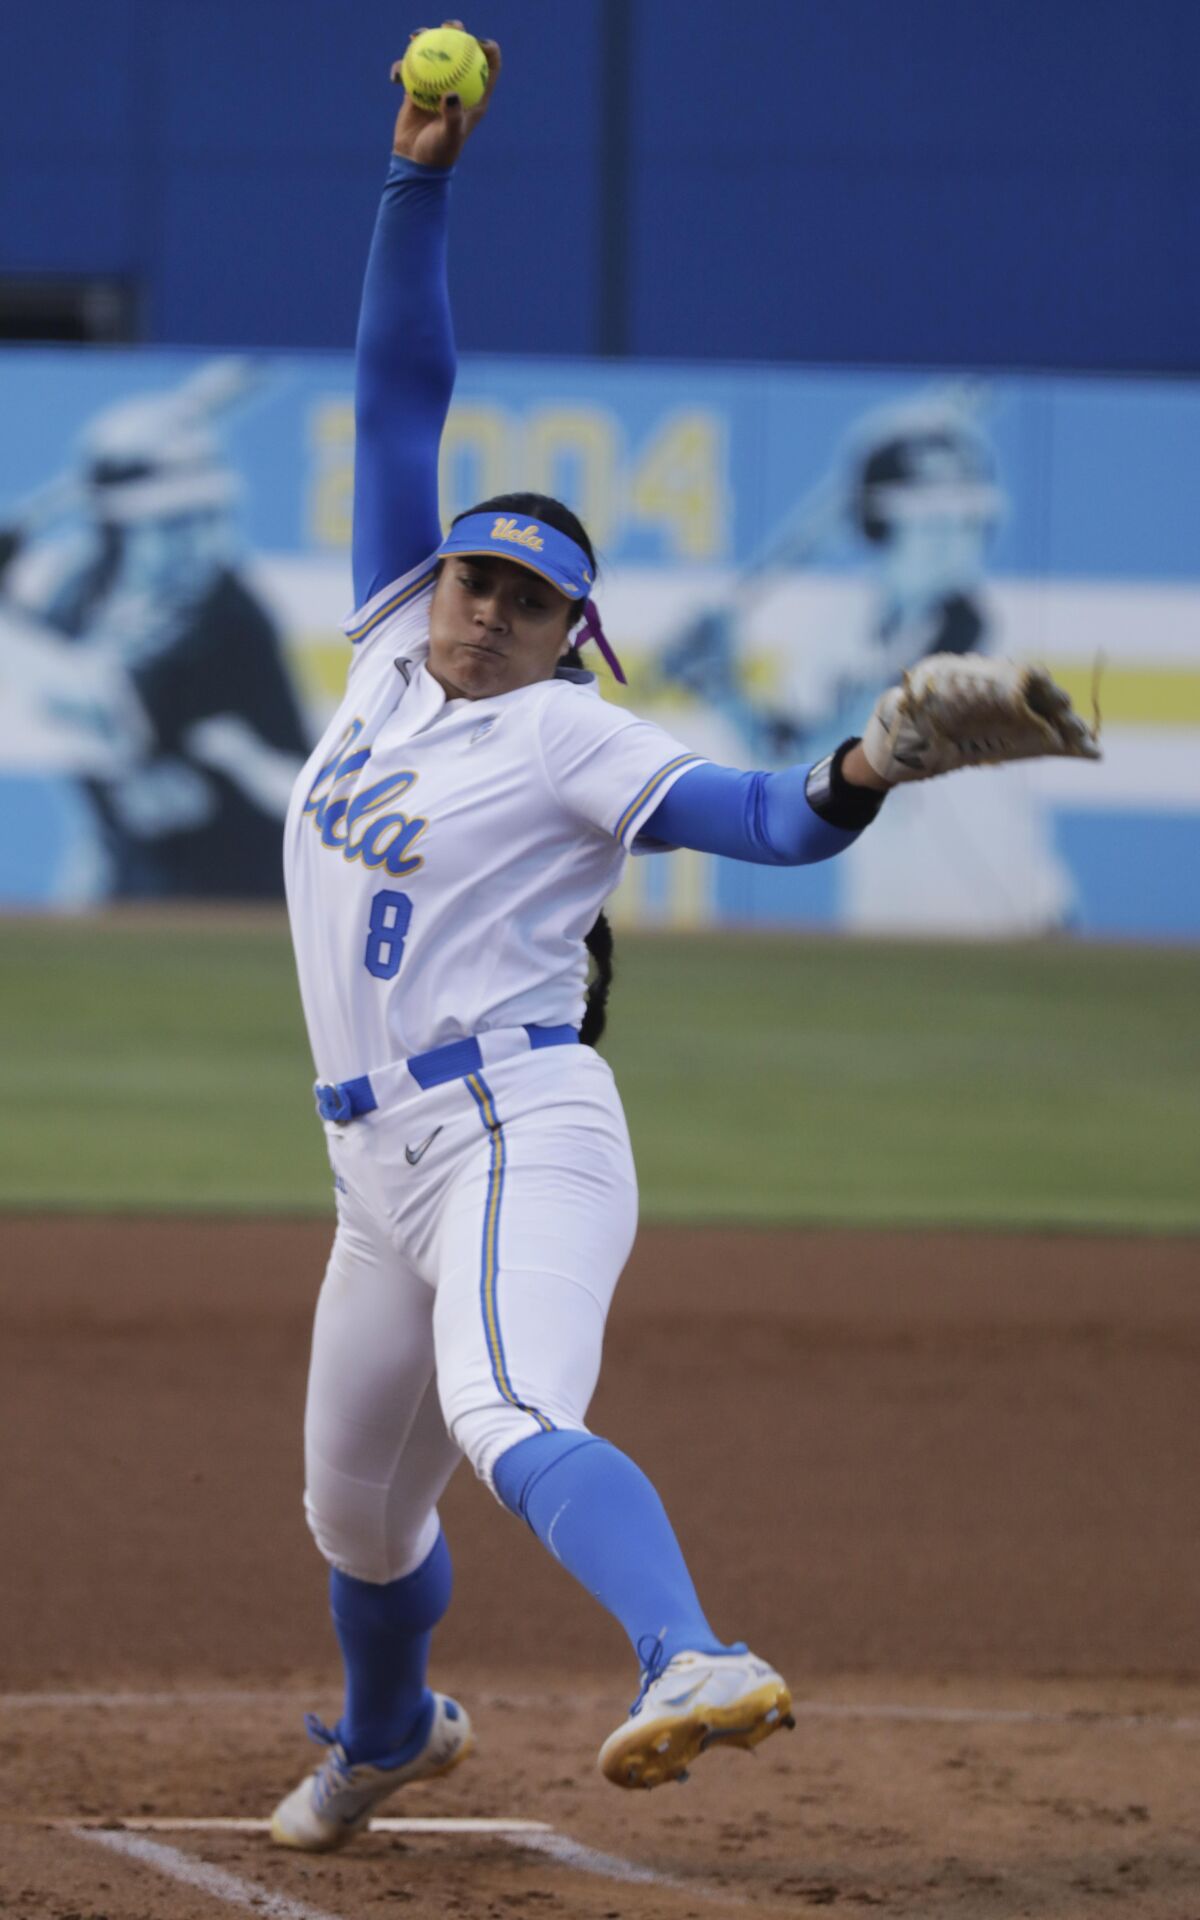 Megan Faraimo winds up a pitch in a game against Utah.